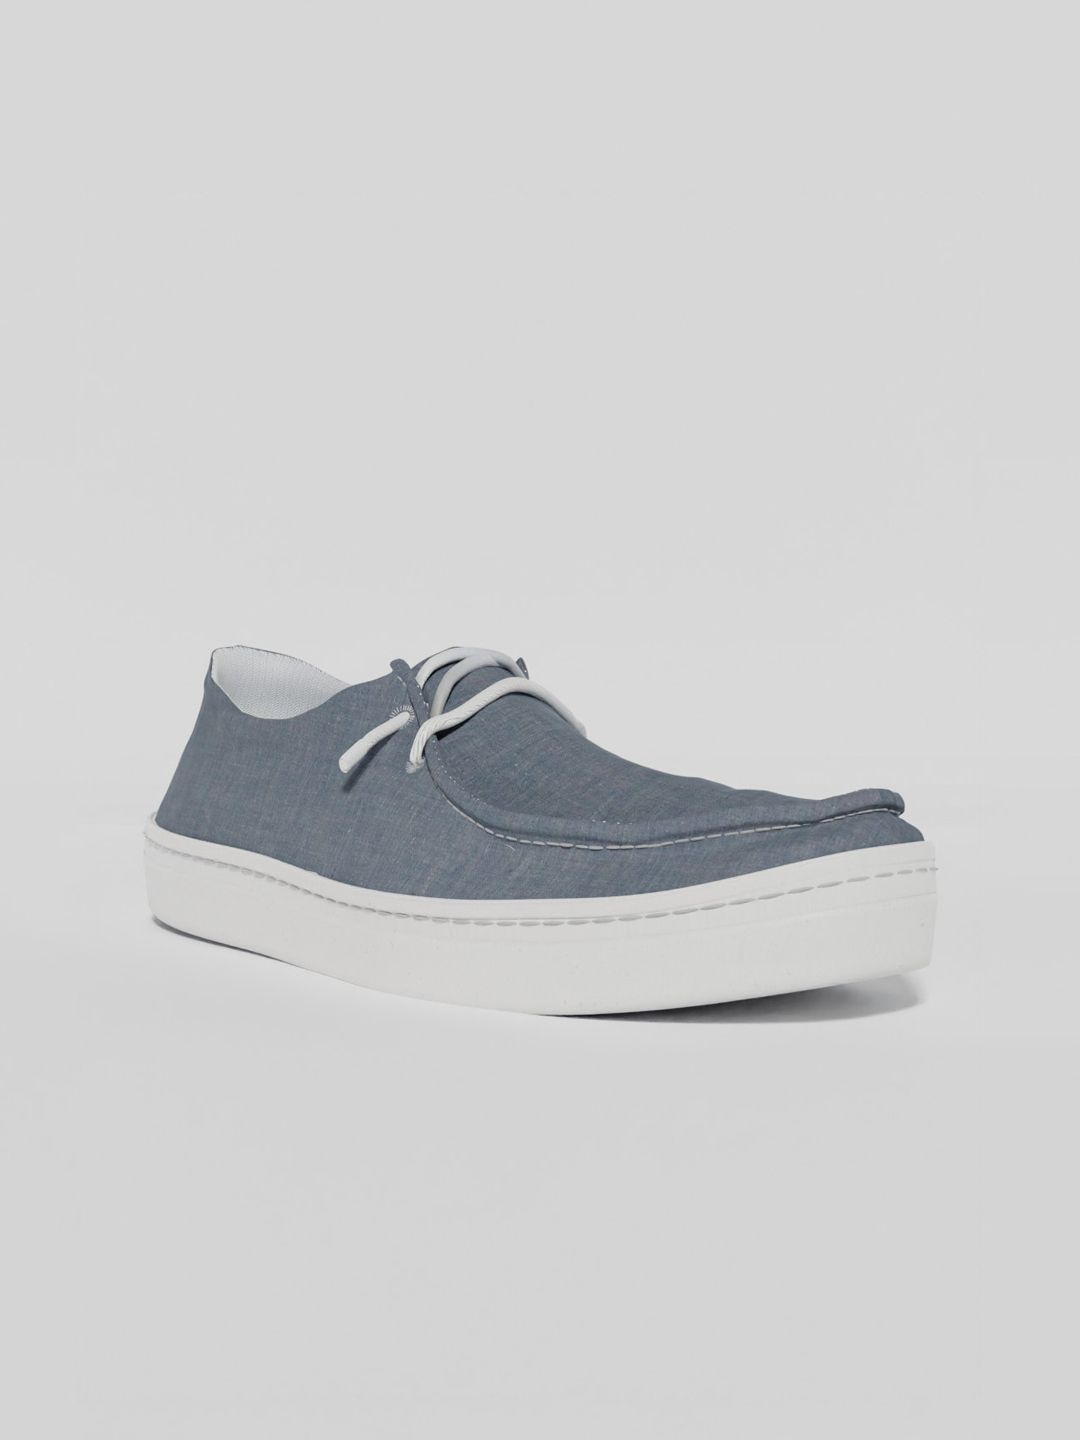 LOKAIT The Sneakers Company Women Blue Boat Shoes Price in India